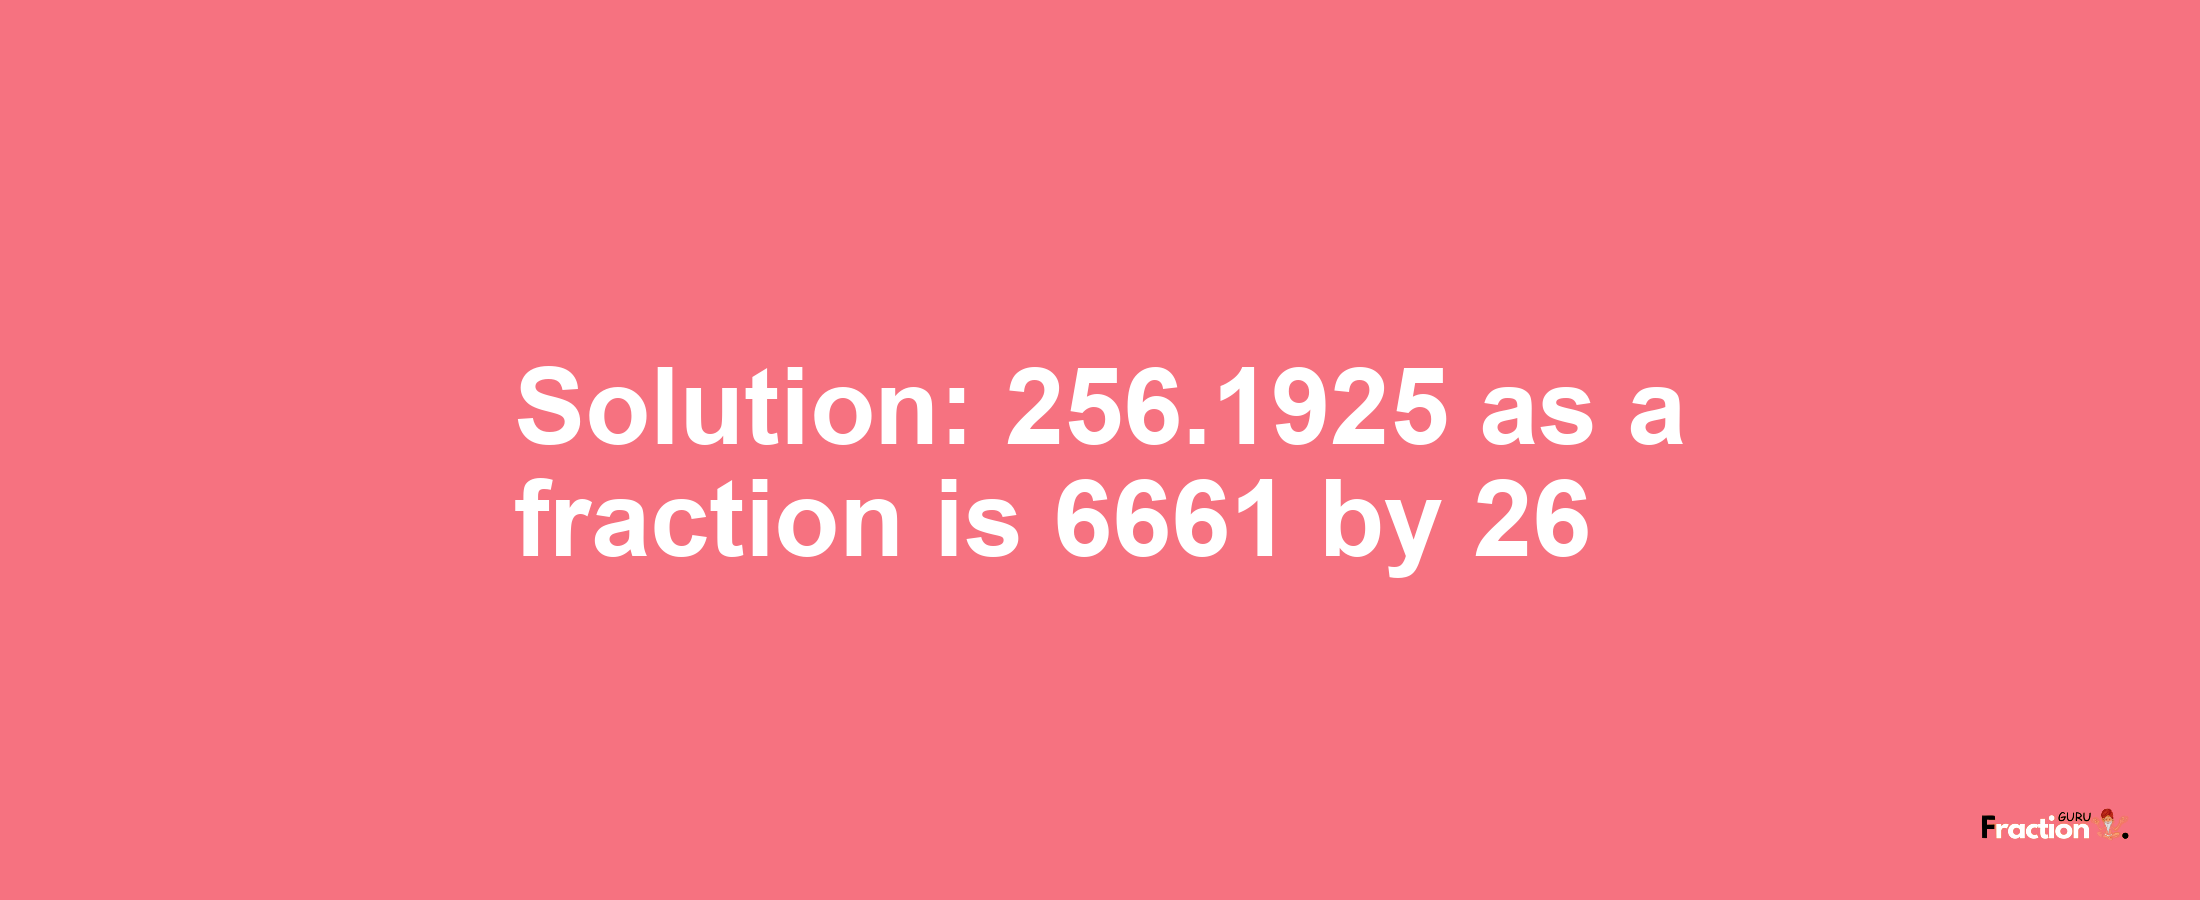 Solution:256.1925 as a fraction is 6661/26